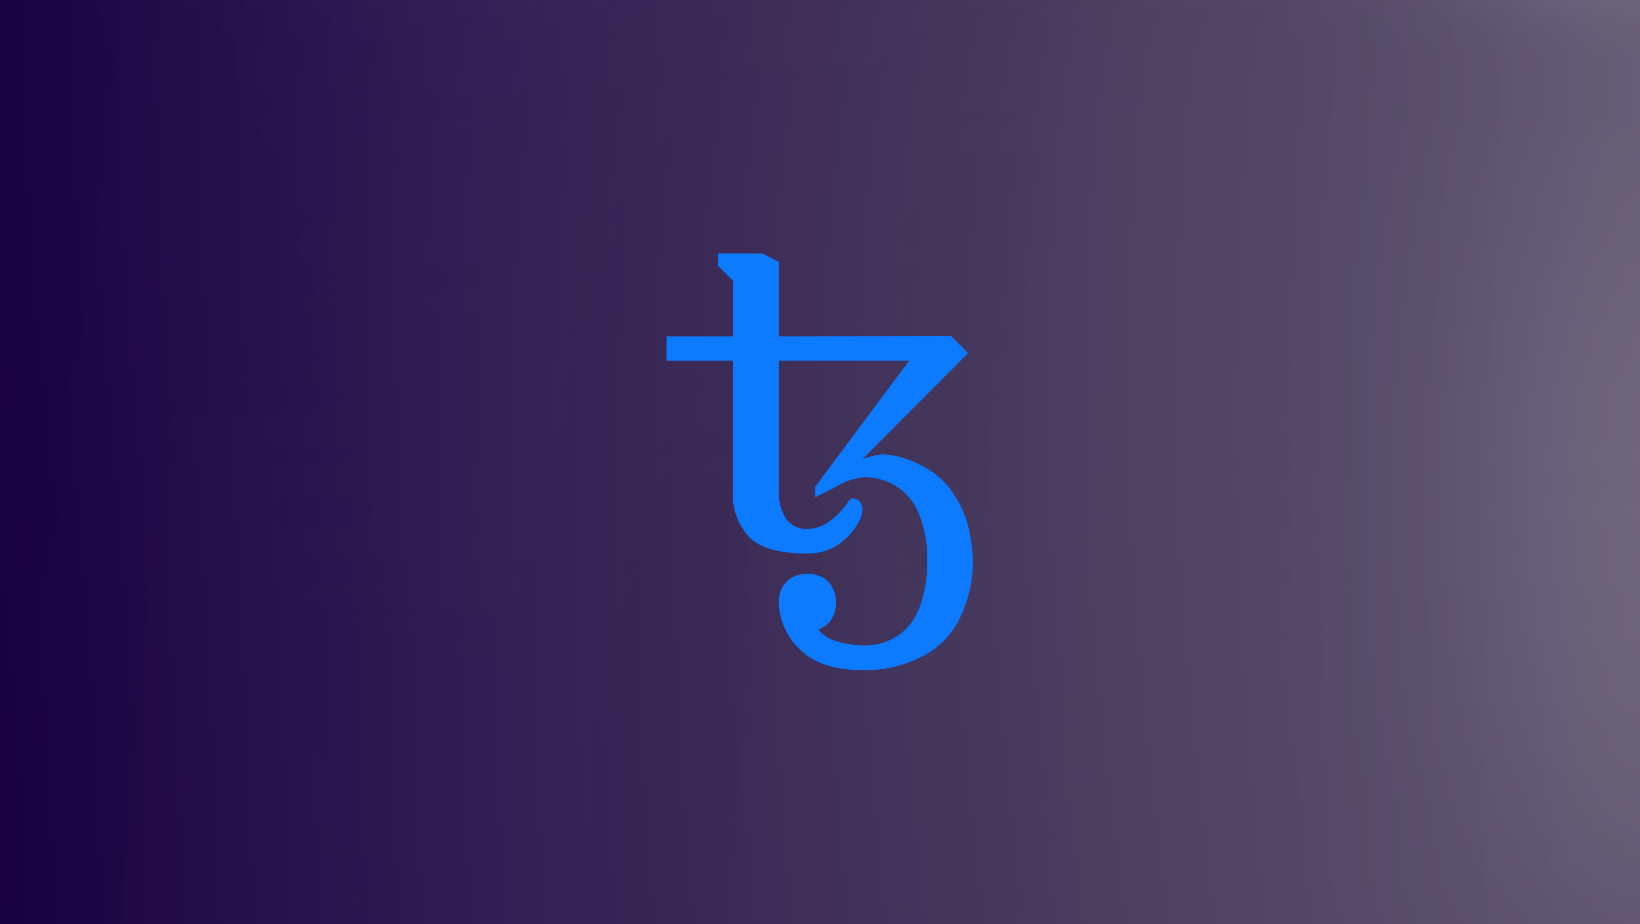 Top 10 Tezos validators for staking - March 2022